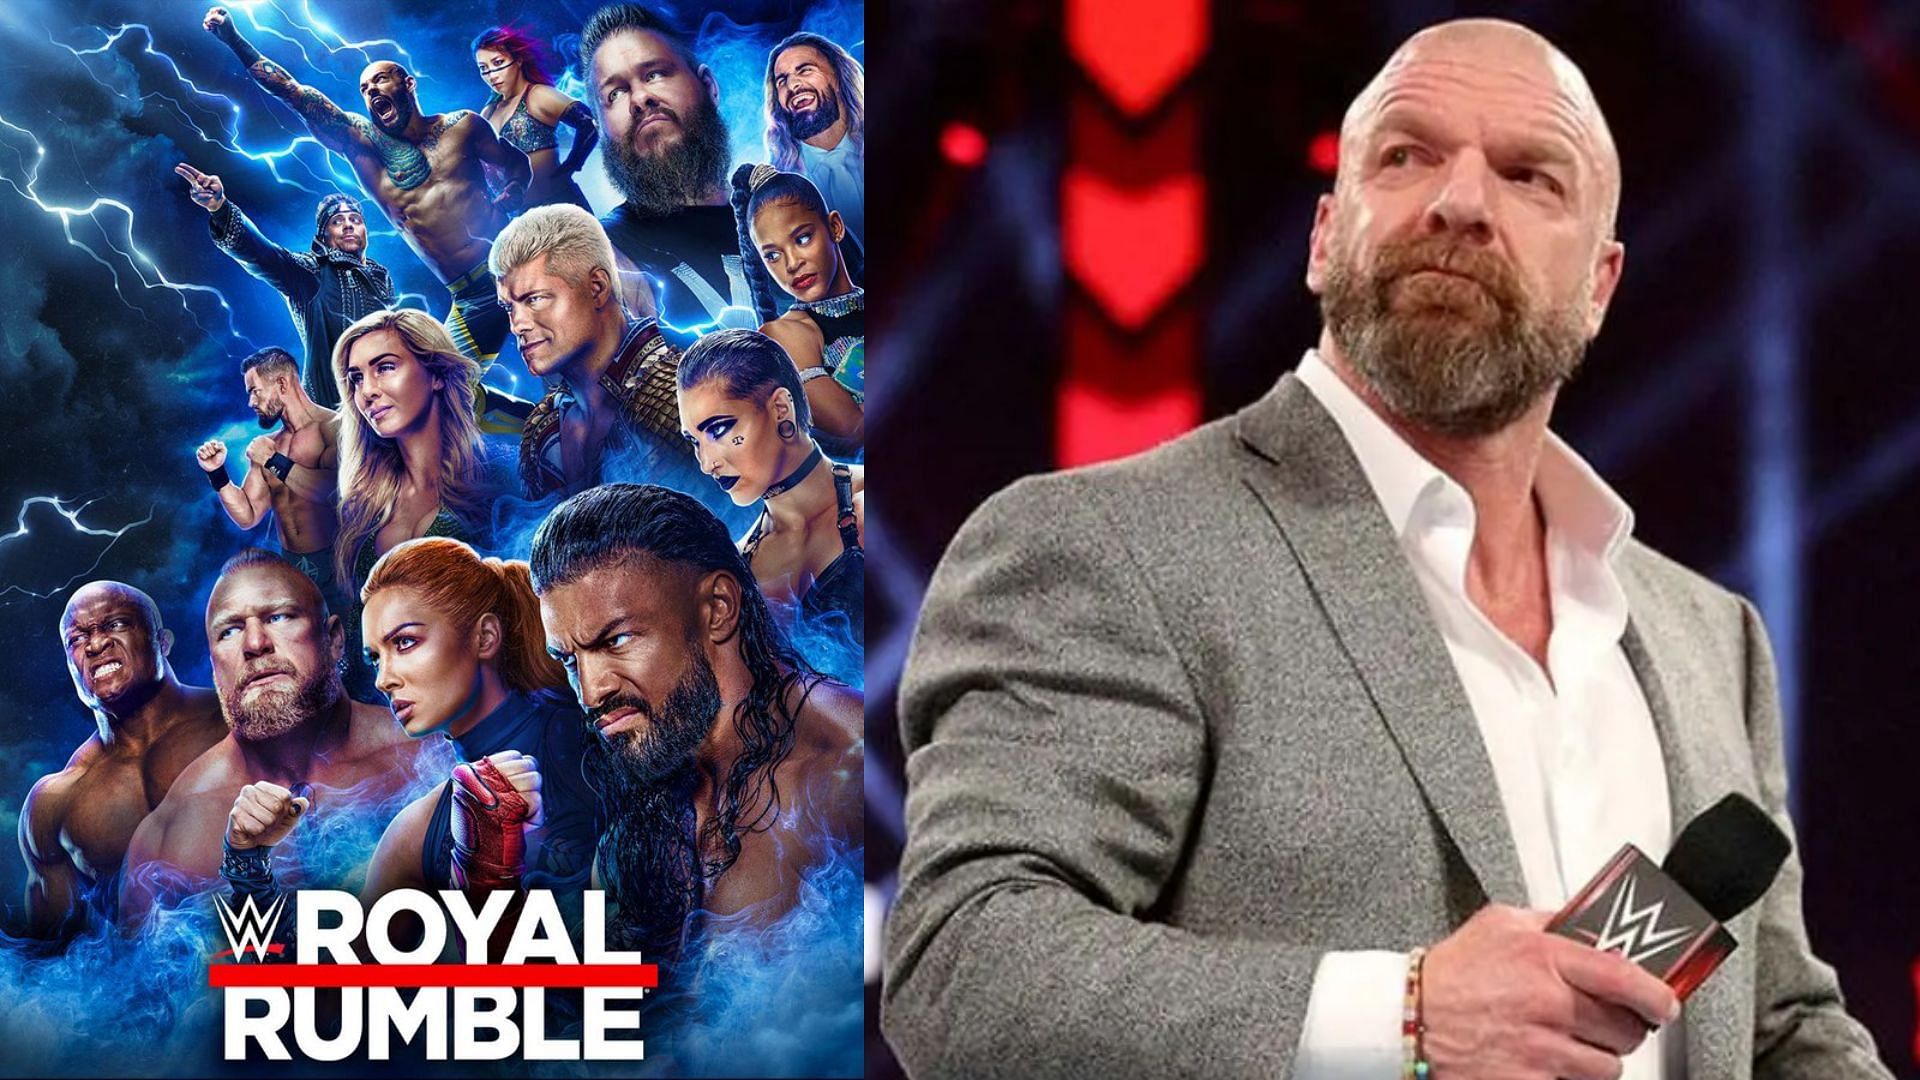 Does Triple H have something special up his sleeve at the Royal Rumble?